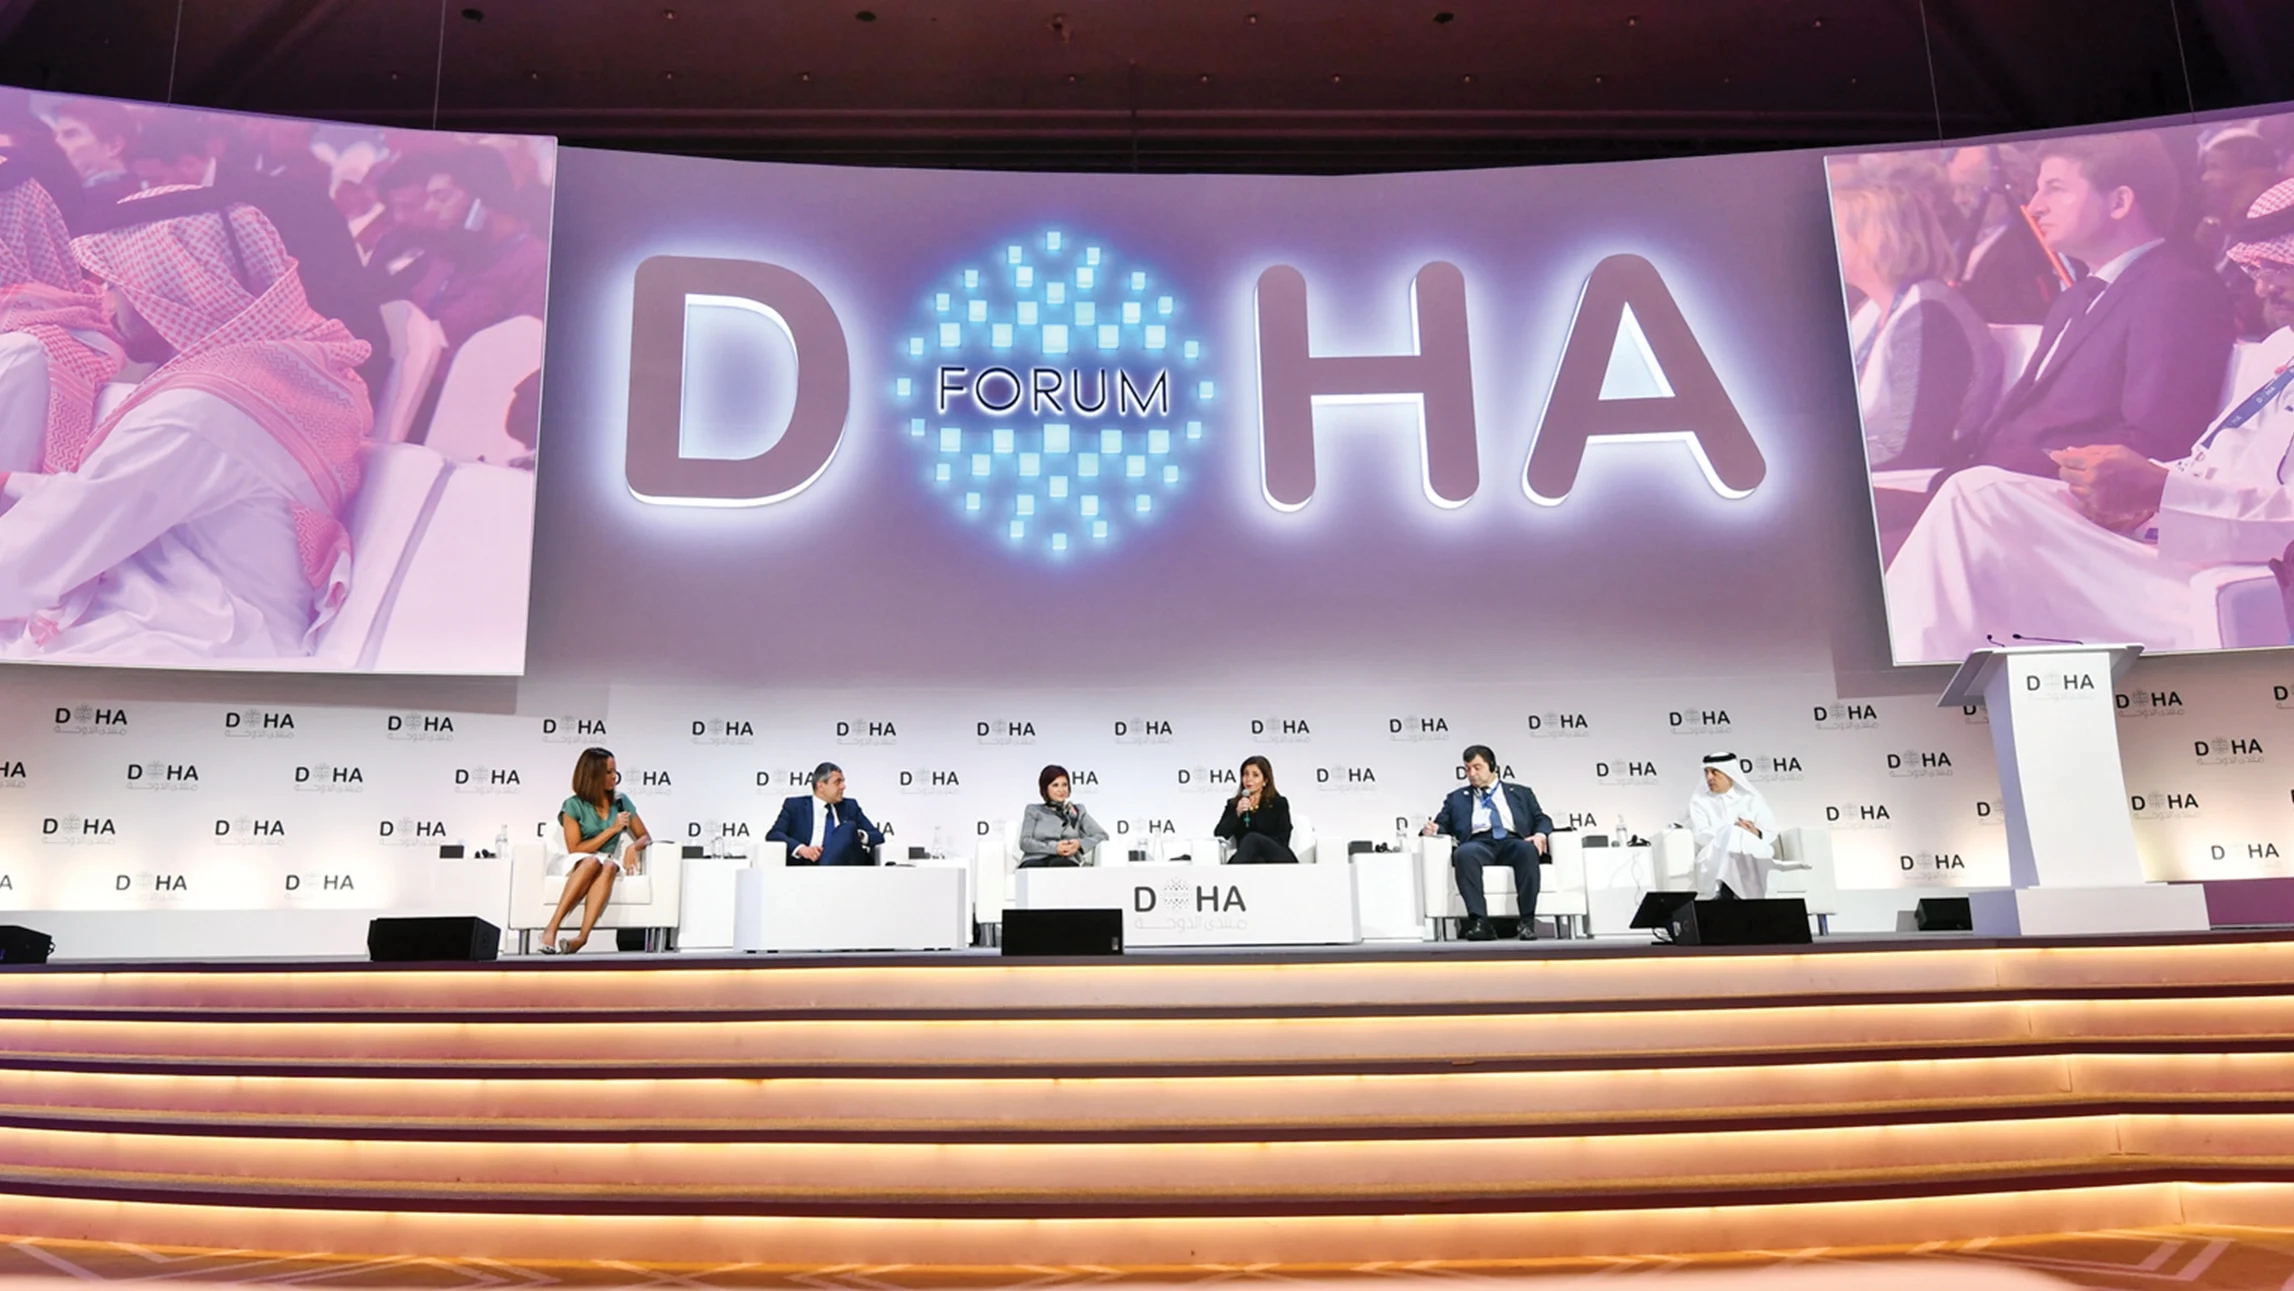 Doha Forum: Rich Record of Deliberations on World's Pressing Issues, Challenges